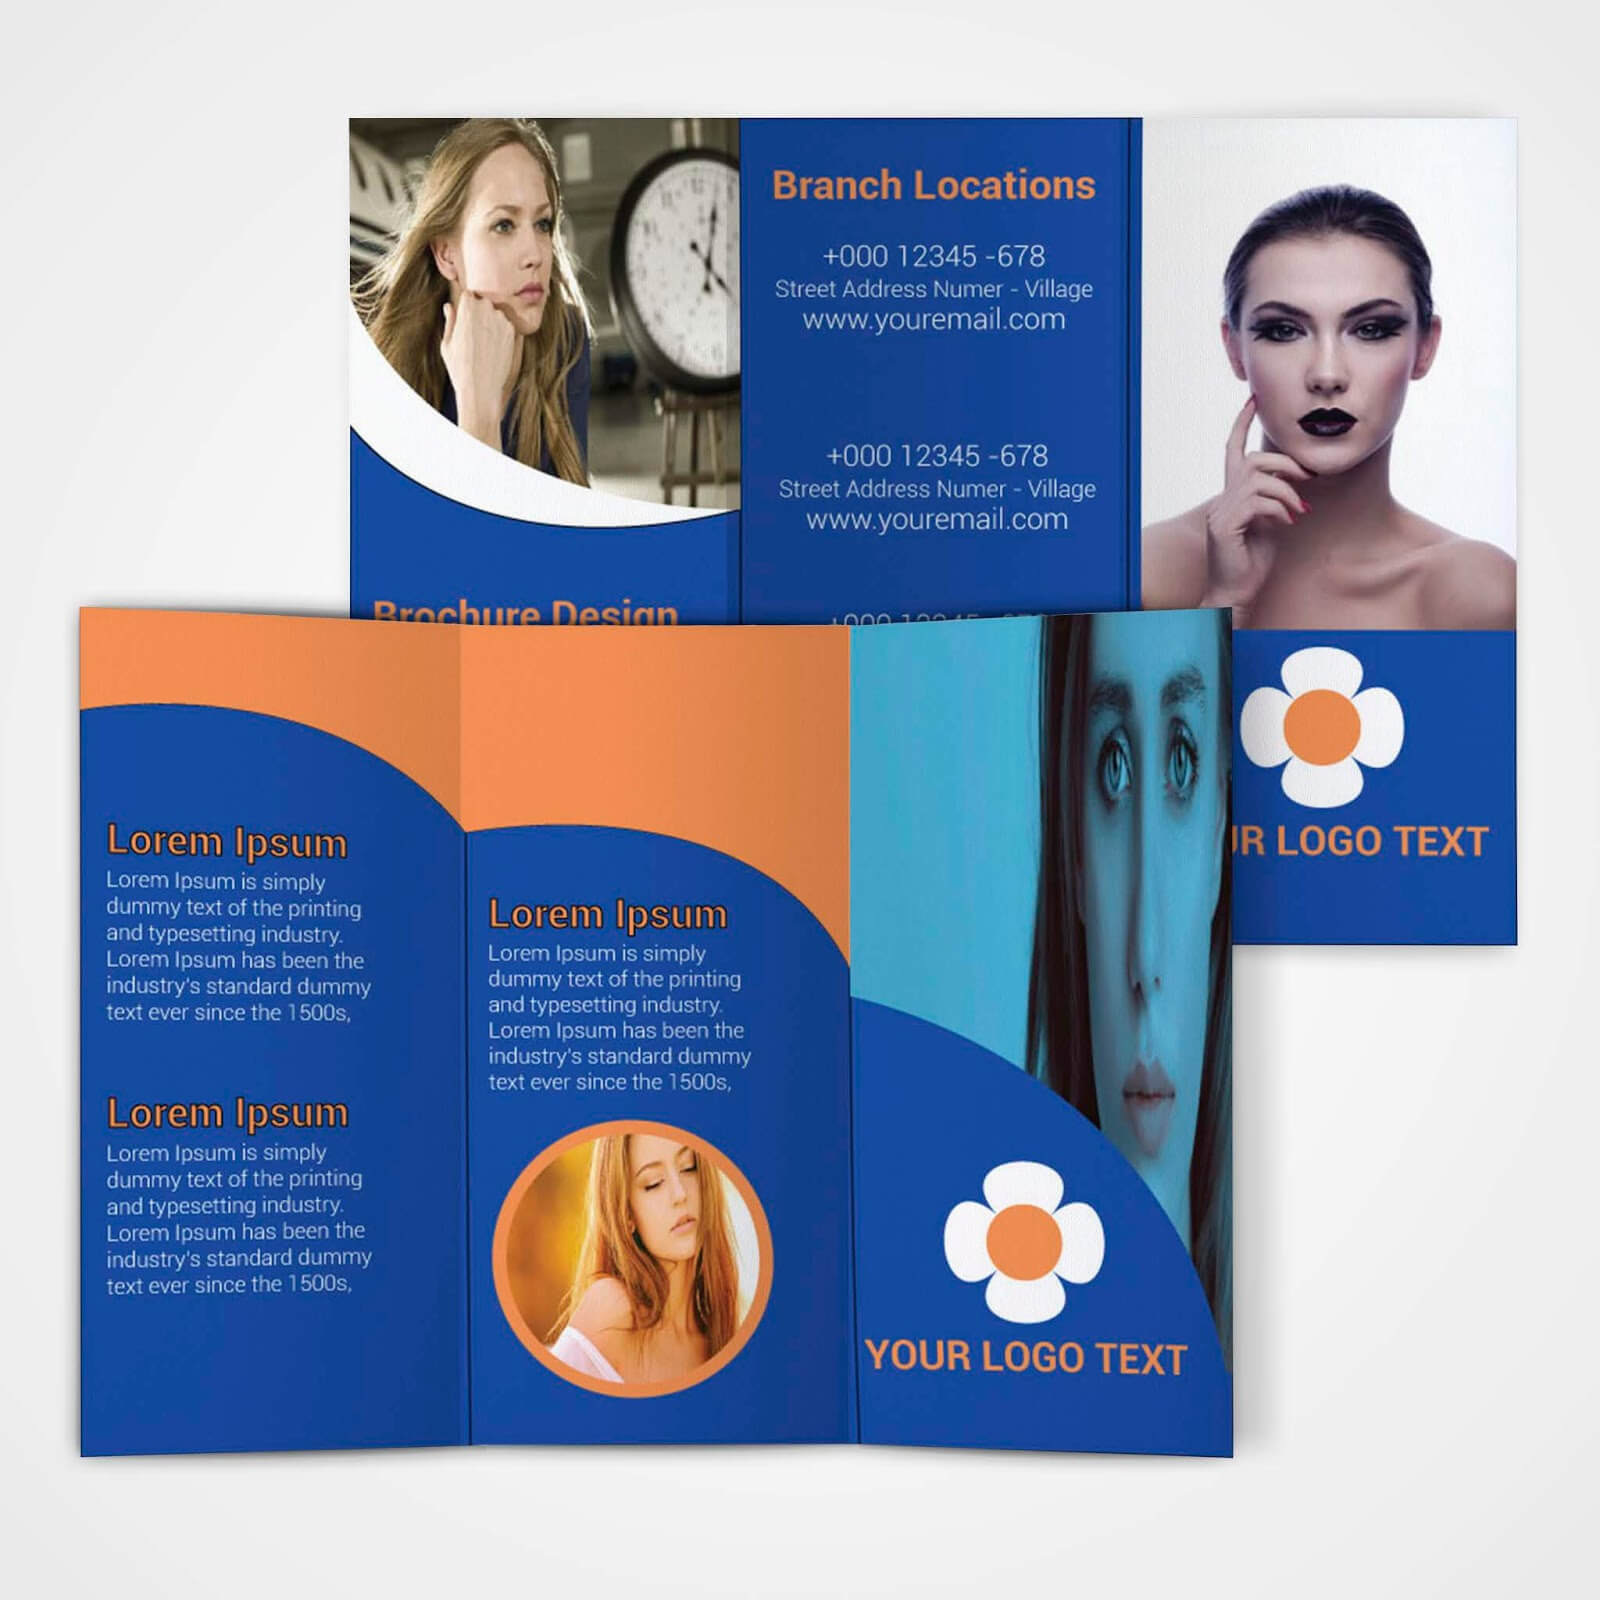 Free Tri Fold Brochure Template – Download Free Tri Fold With Free Illustrator Brochure Templates Download